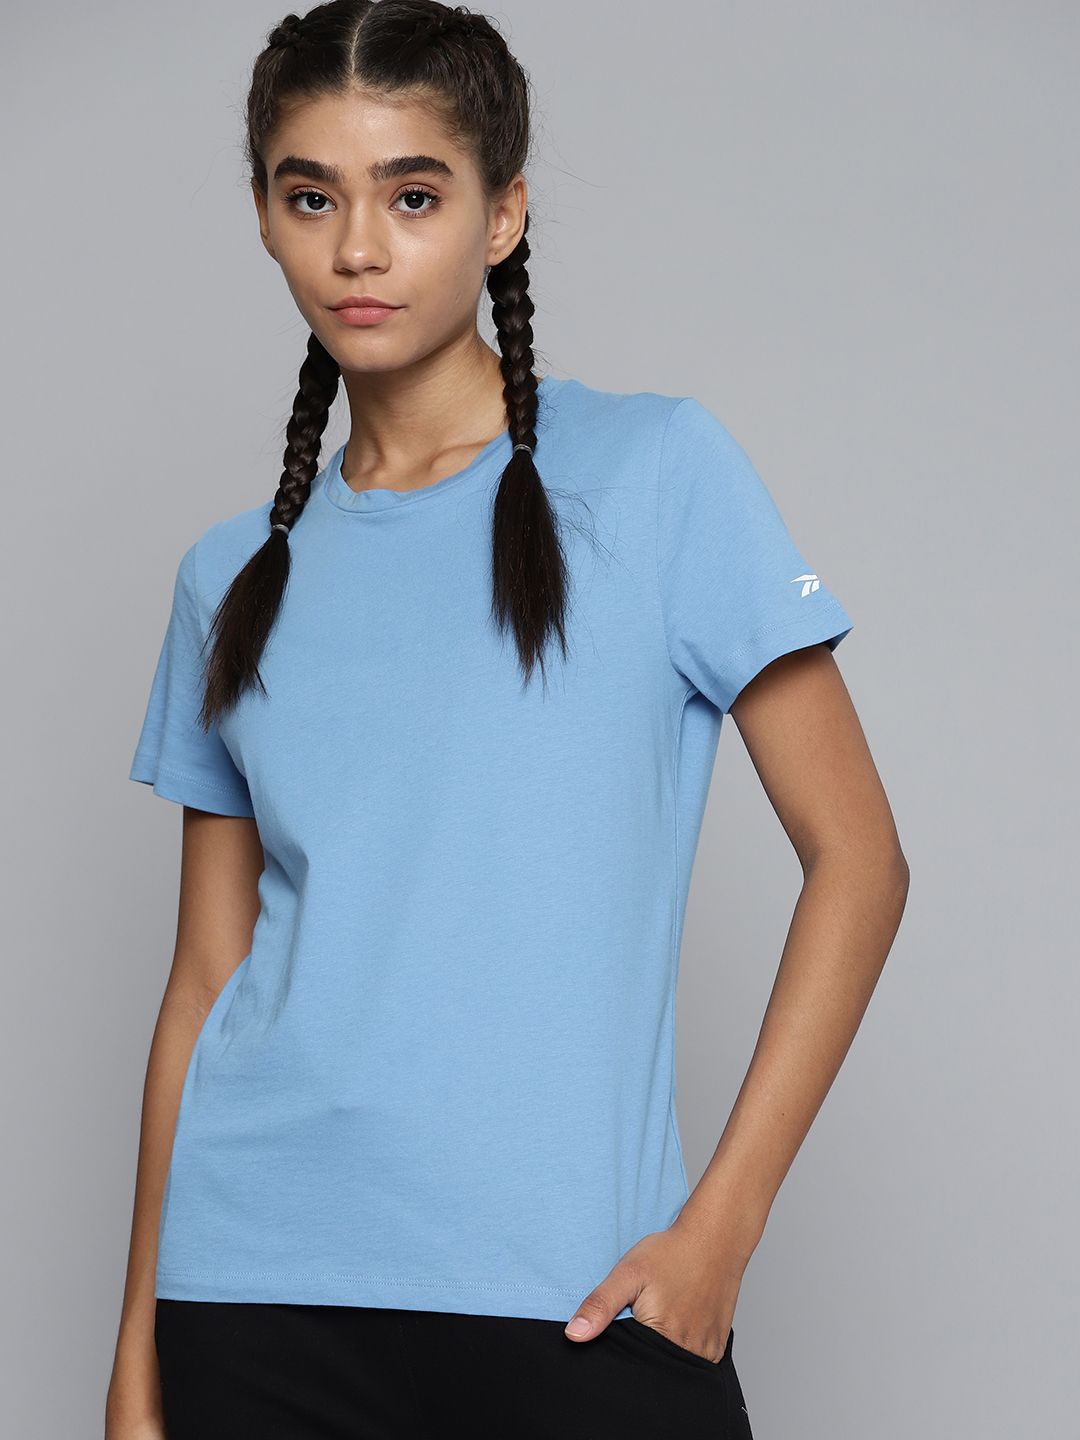 Reebok Women Blue Solid Training or Gym T-shirt Price in India